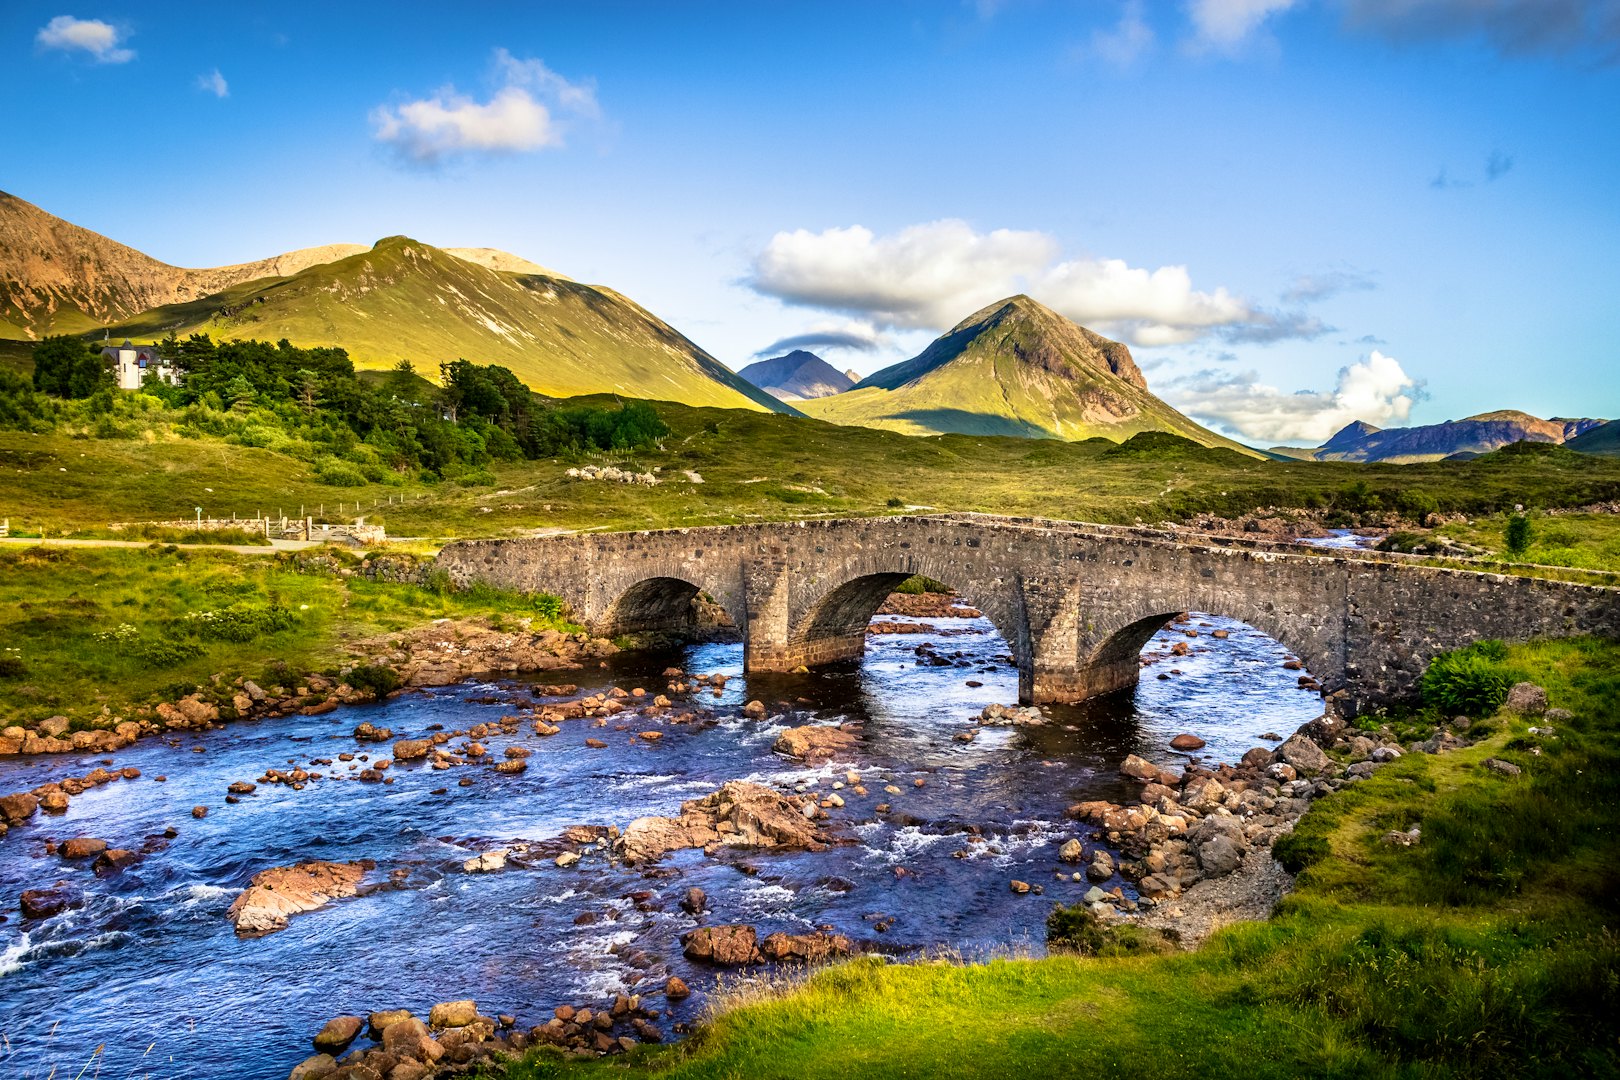 coach tours to scotland from peterborough